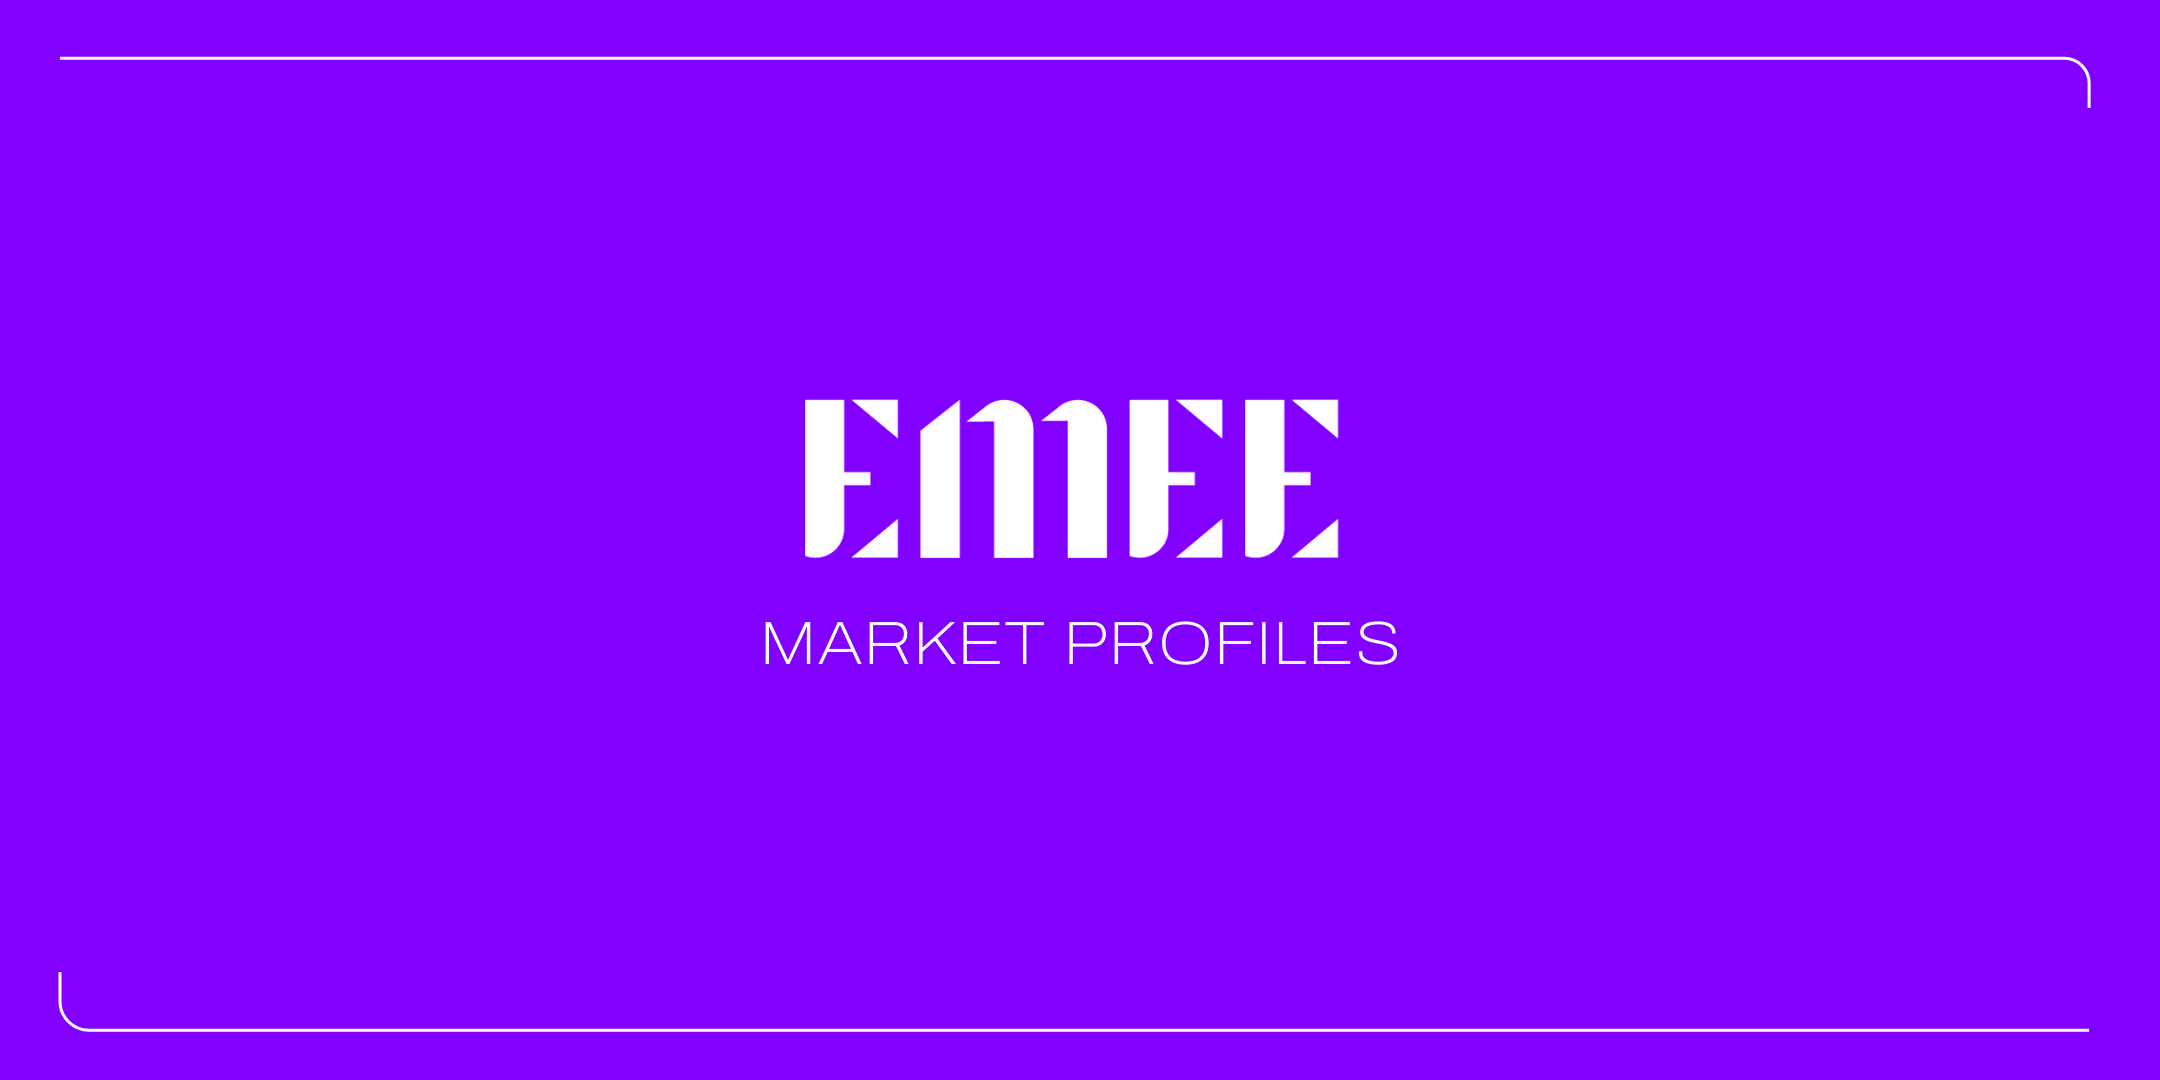 EMEE Market Profiles – Available now!